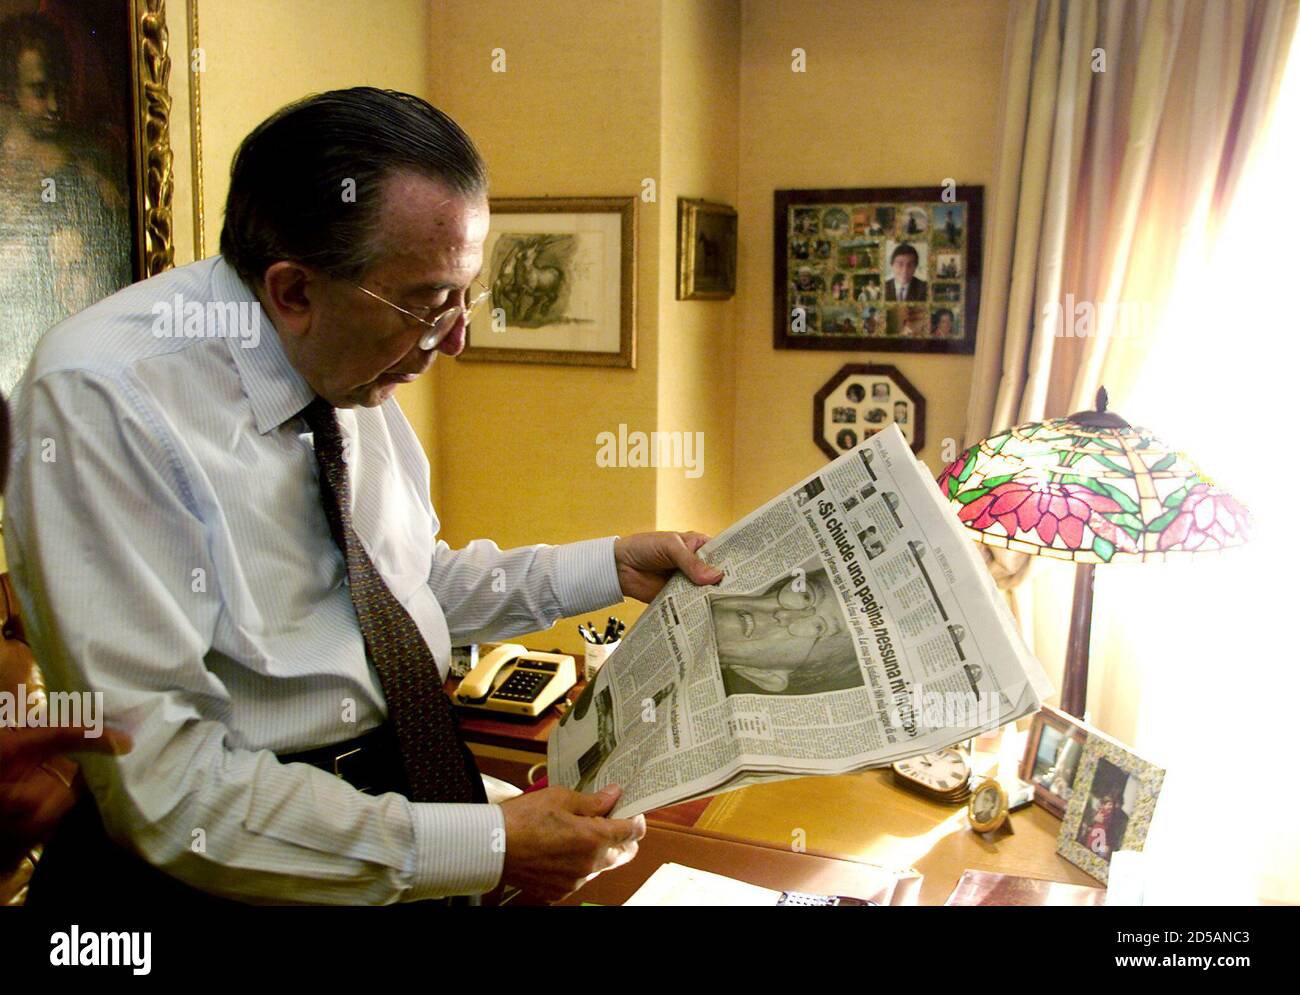 Seven-times Italian prime minister Giulio Andreotti reads a newspaper with  a picture of himself on the cover,in his office September 25. Andreotti was  acquitted on September 24 of ordering the murder of